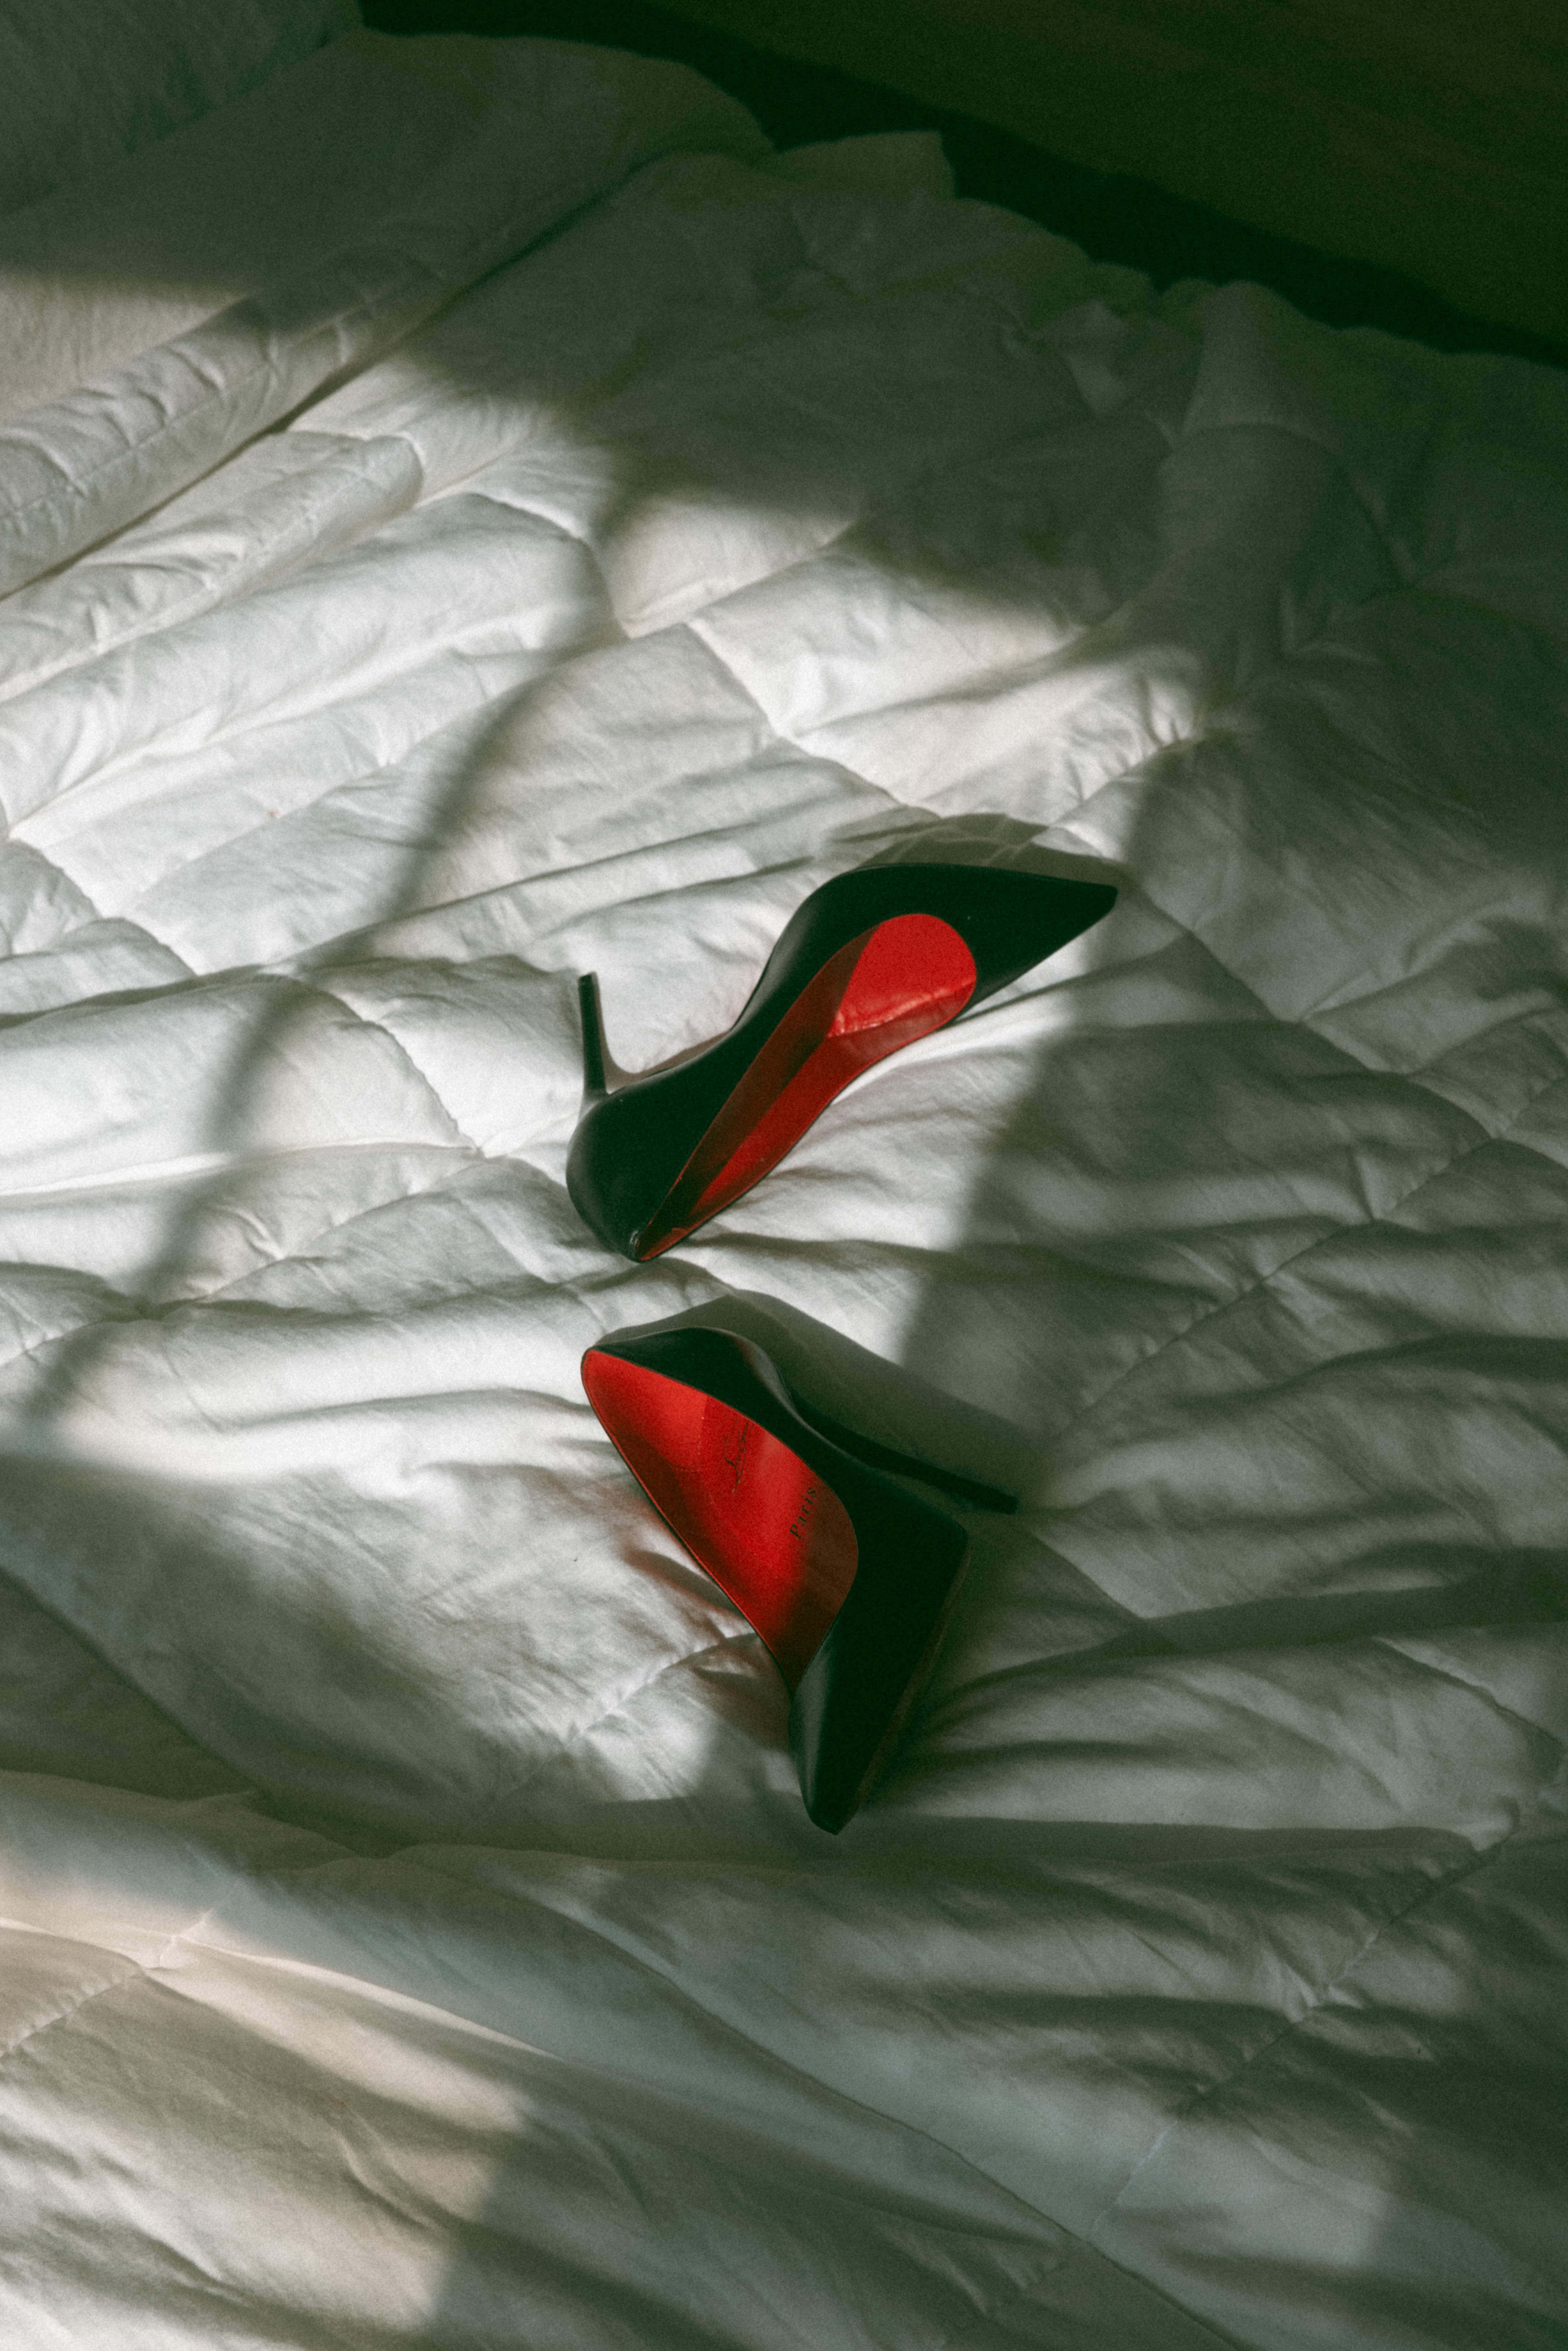 creative boudoir photo ideas from louboutins on a bed with shadows splayed across them 